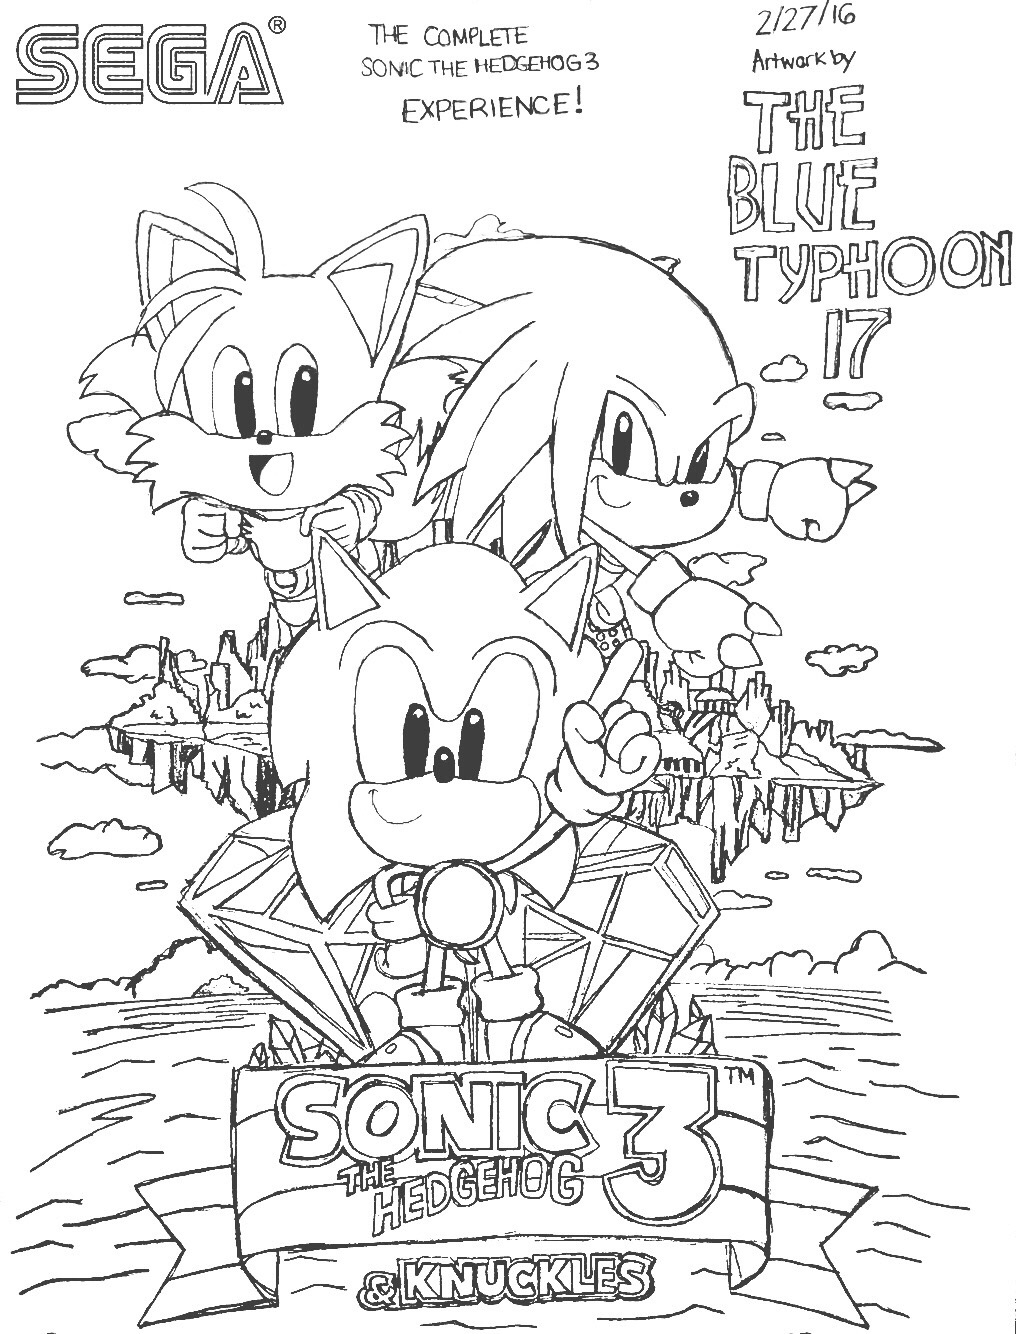 Sonic the hedgehog and knuckles redoagain by bluetyphoon on